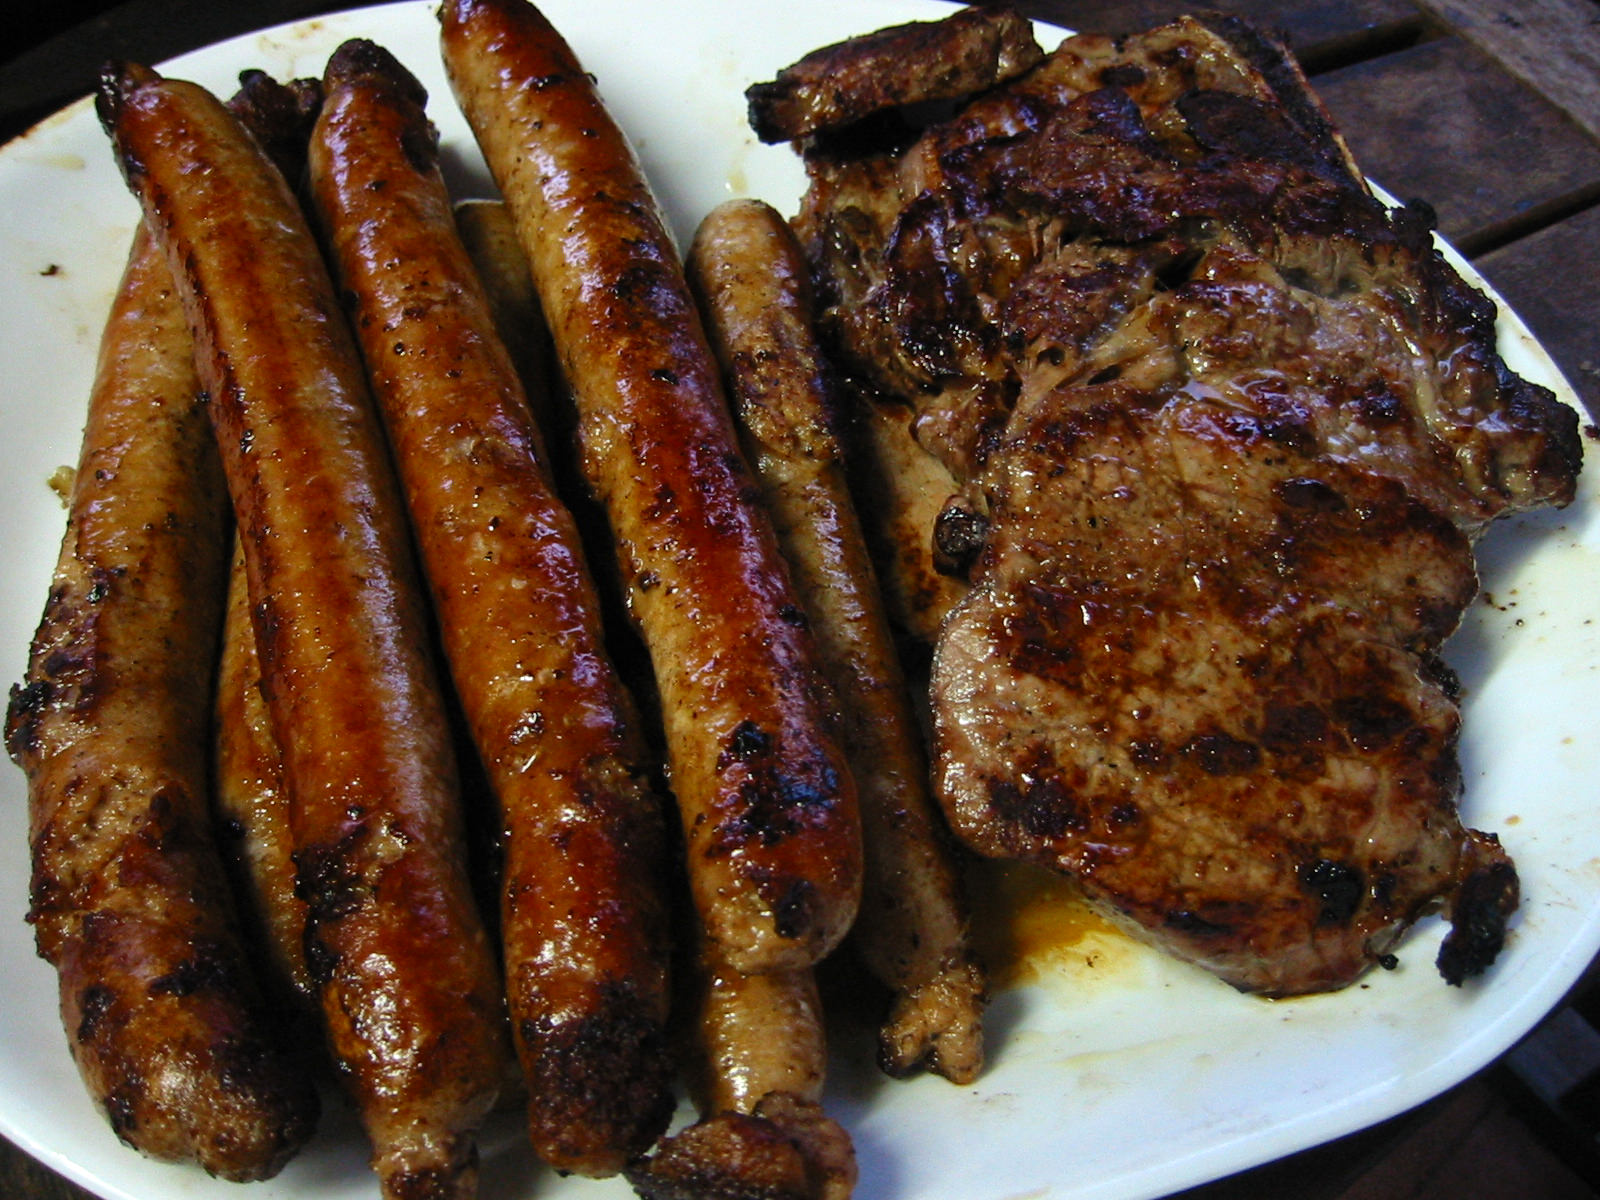 Platter of steaks and snags